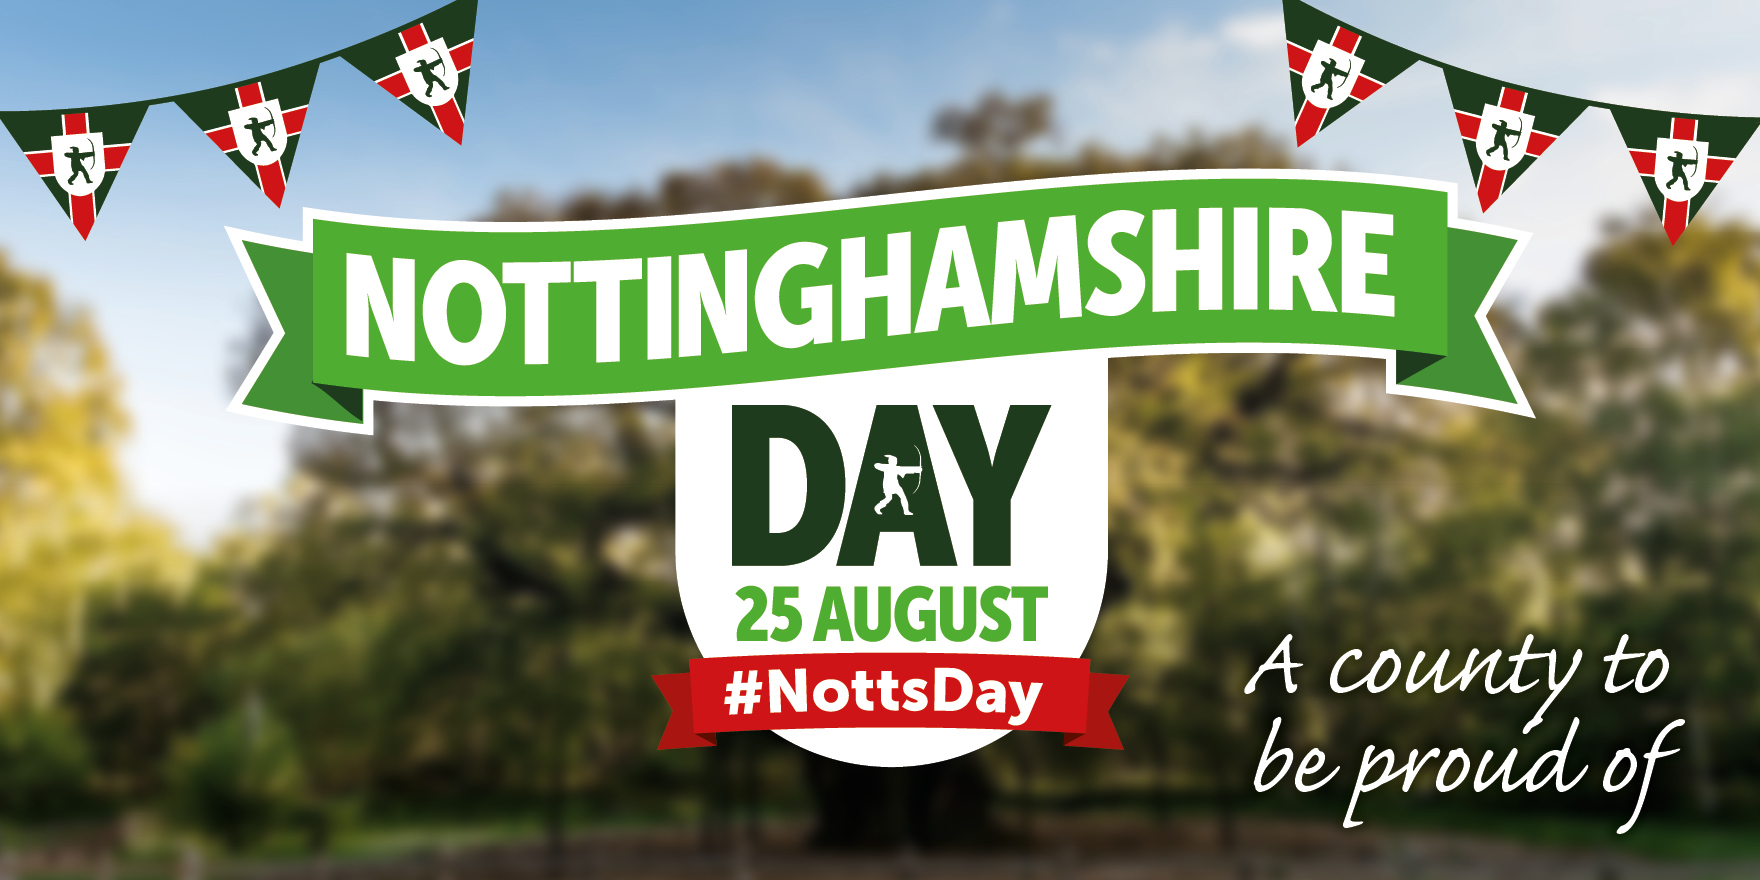 Nottinghamshire Day 25 August